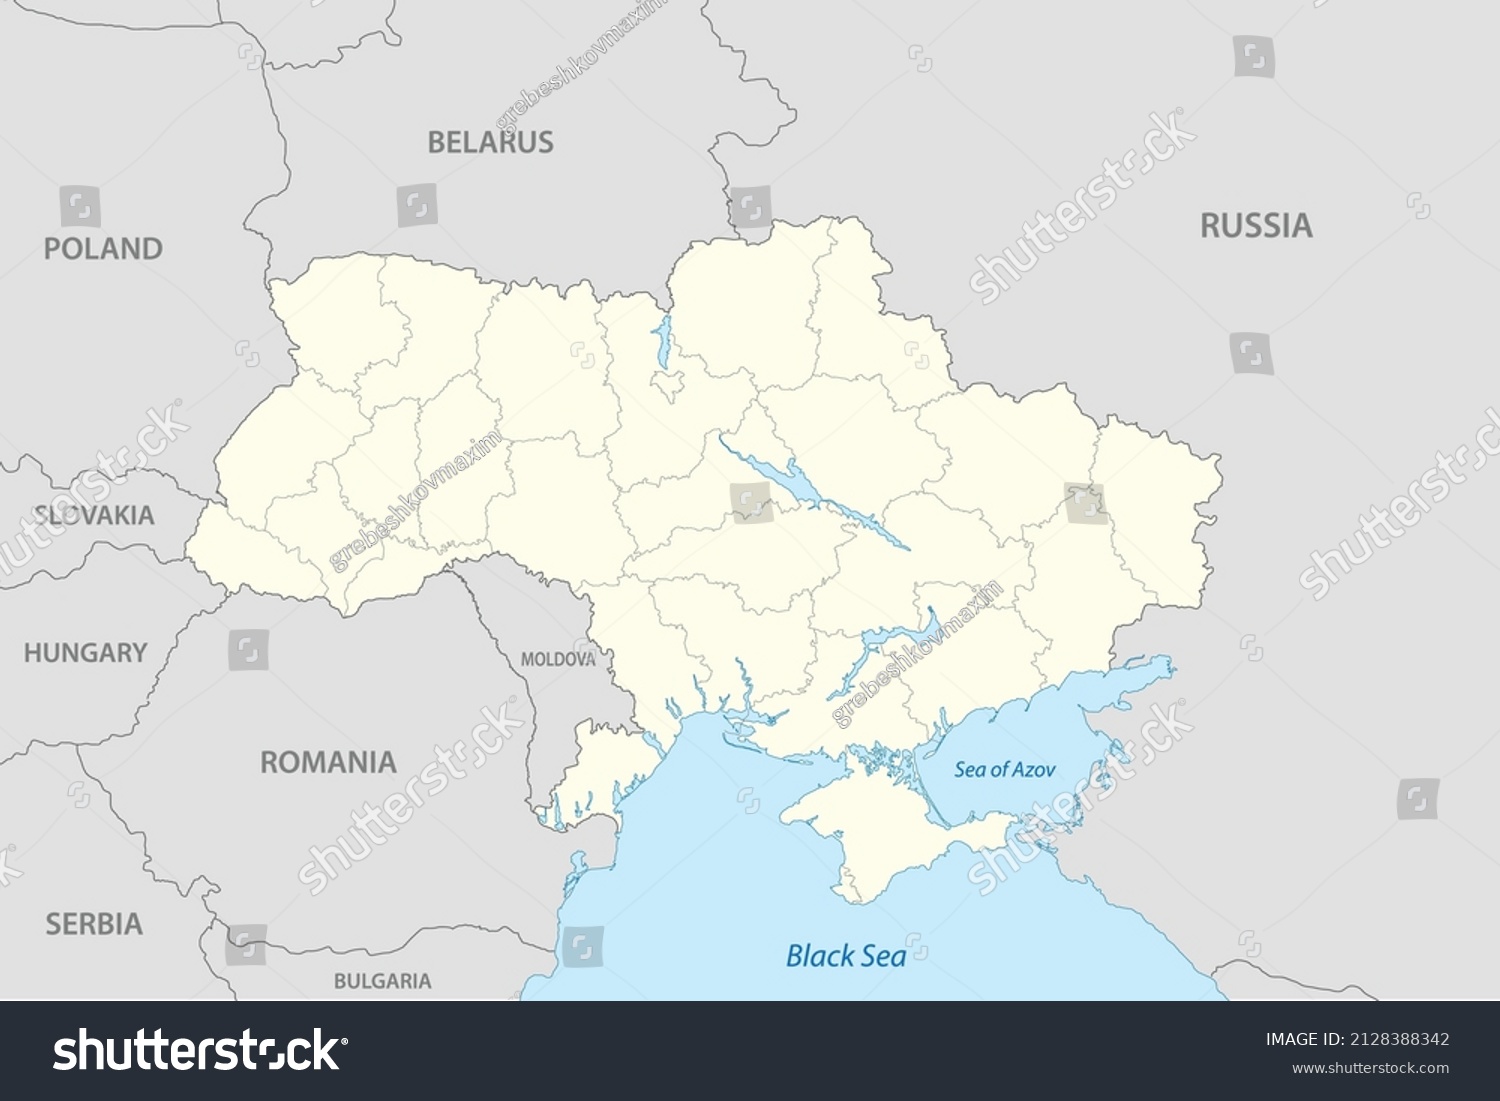 Political map of Ukraine with borders of the regions. Vector illustration #2128388342